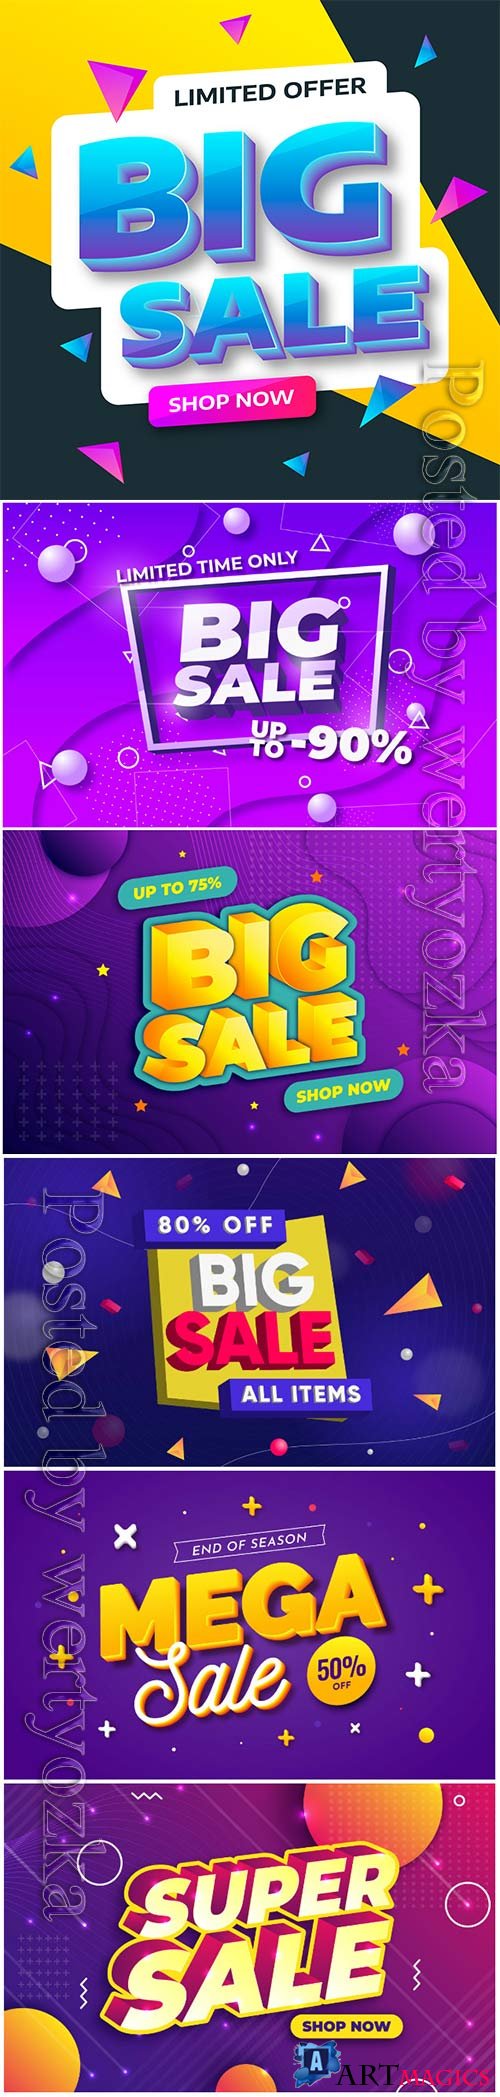 Colorful 3d sales vector background # 6